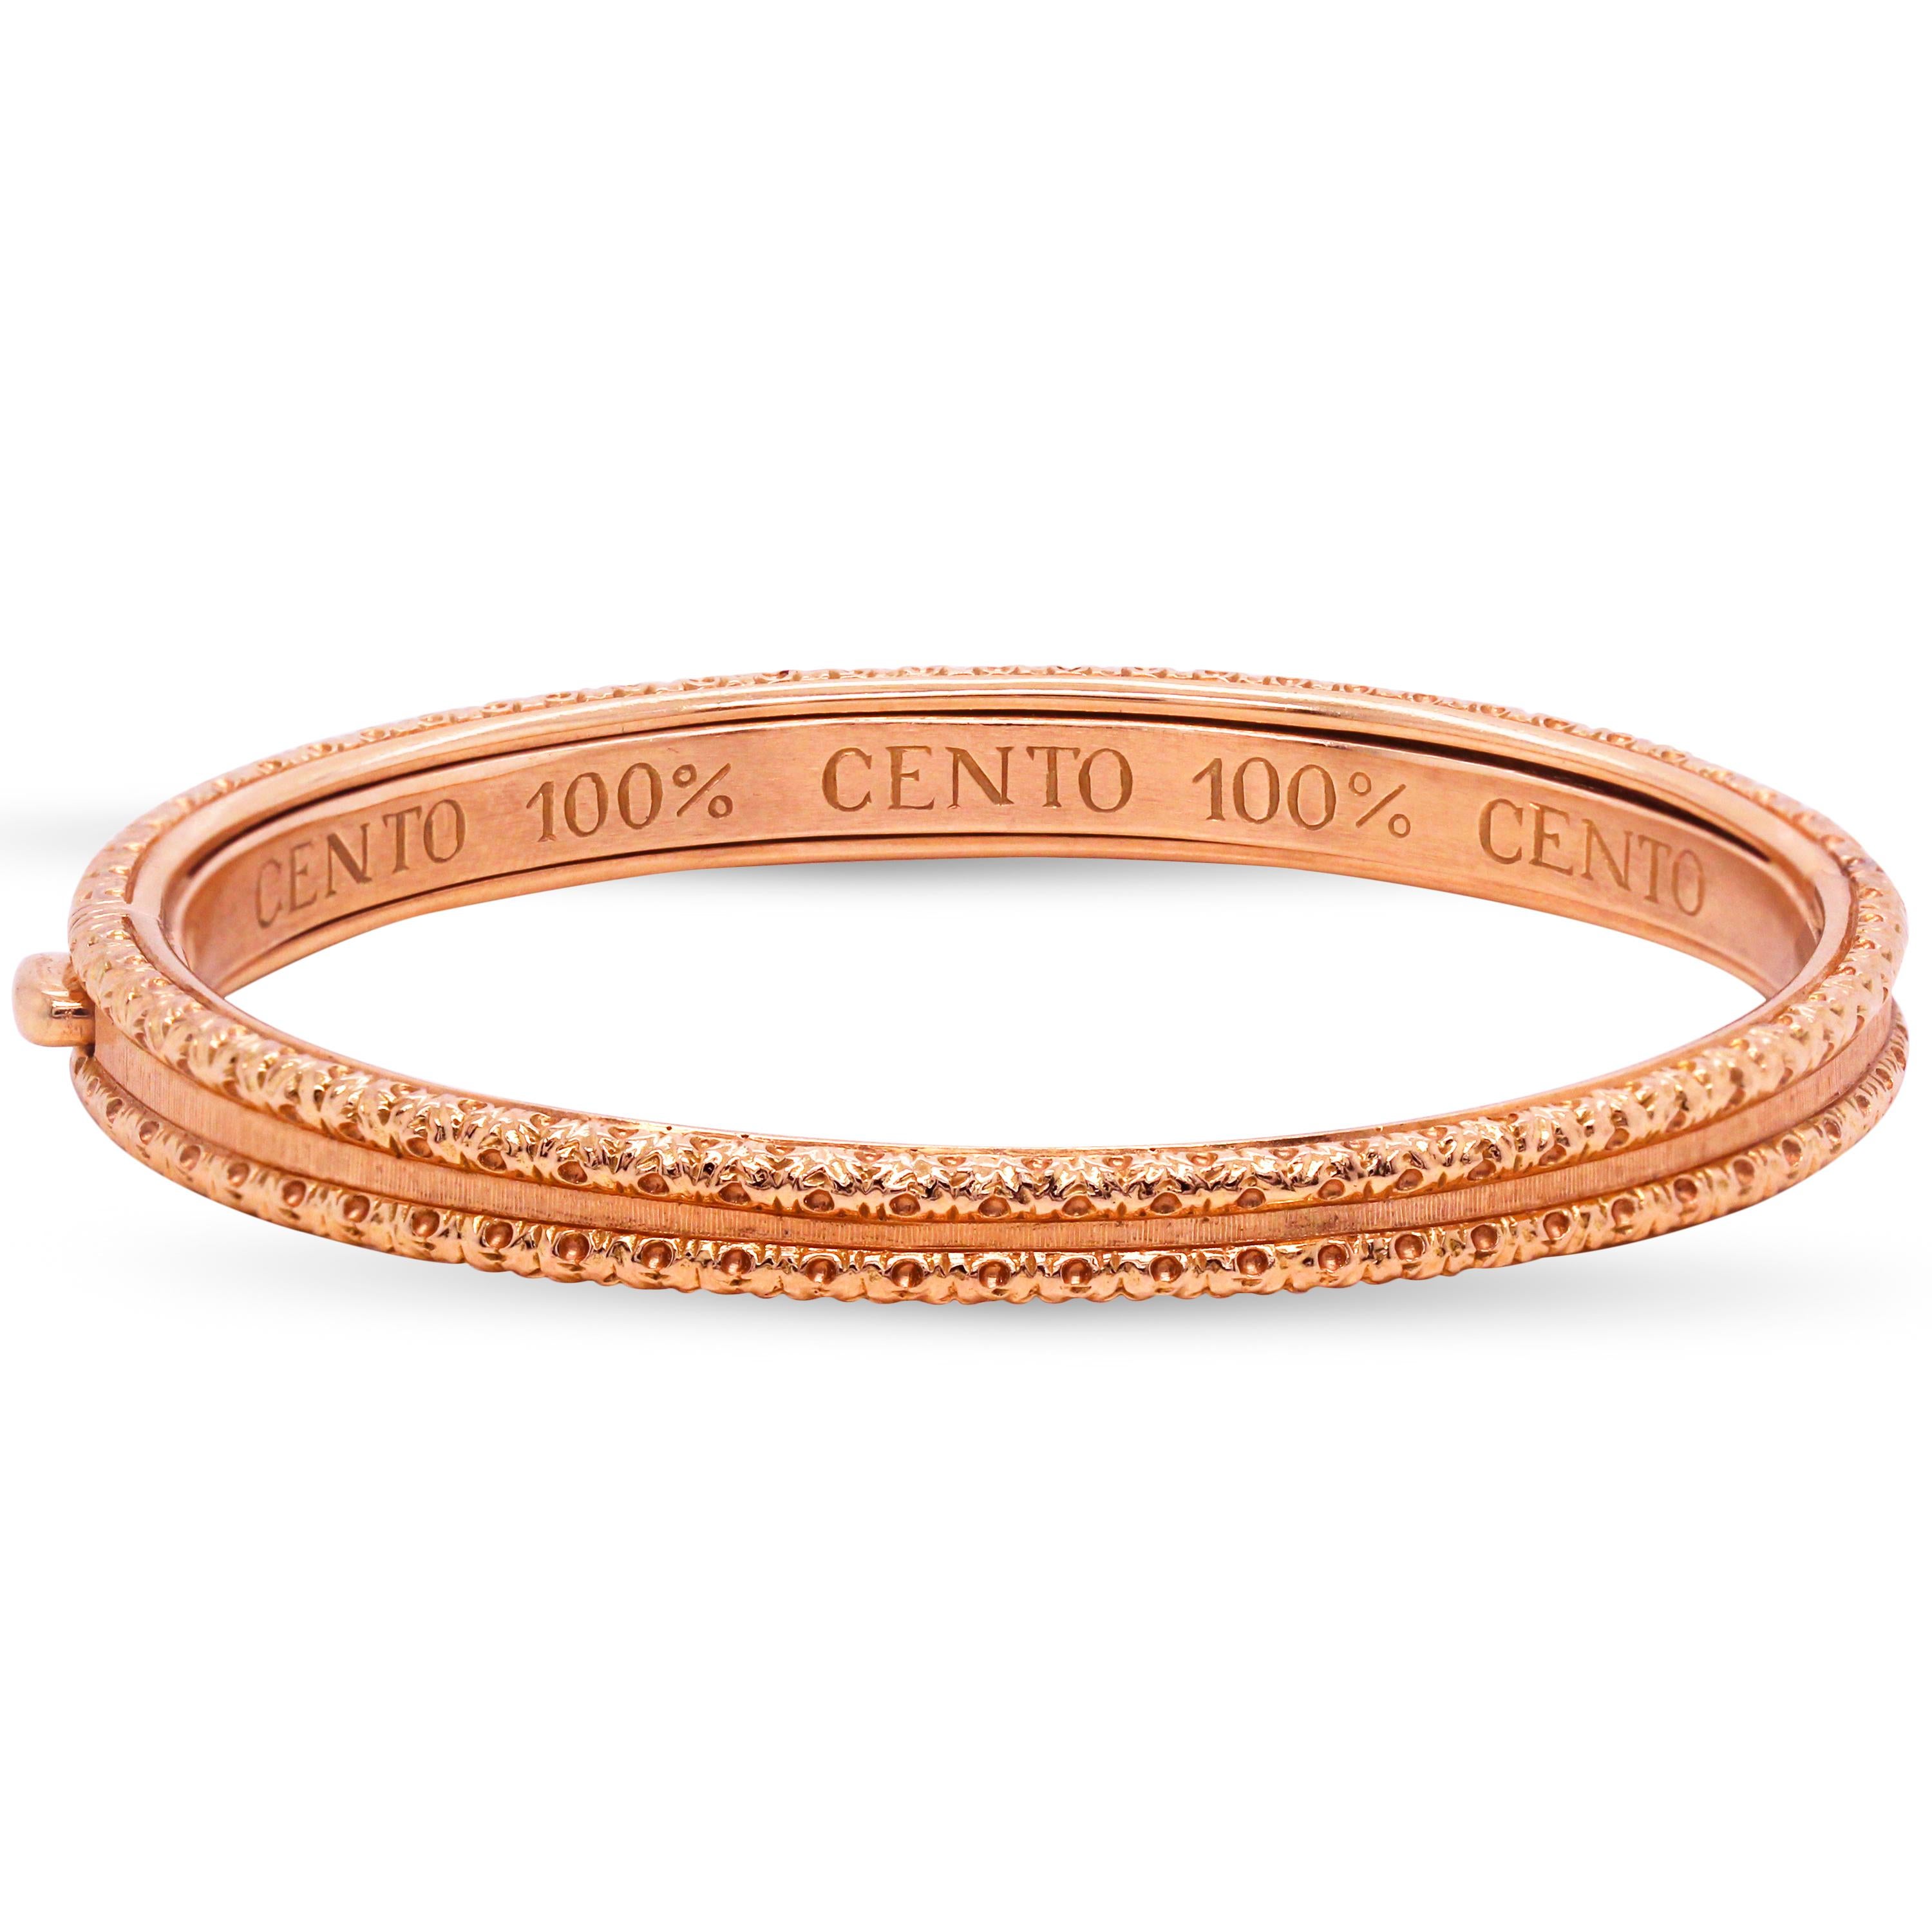 Roberto Coin Cento Collection 18K Rose Gold and Diamond Thin Bangle Bracelet

From the Cento Collection by Roberto Coin

This bracelet is done in solid 18k gold with diamonds set on one half.

Apprx. 2 carat G color, VS clarity diamonds total